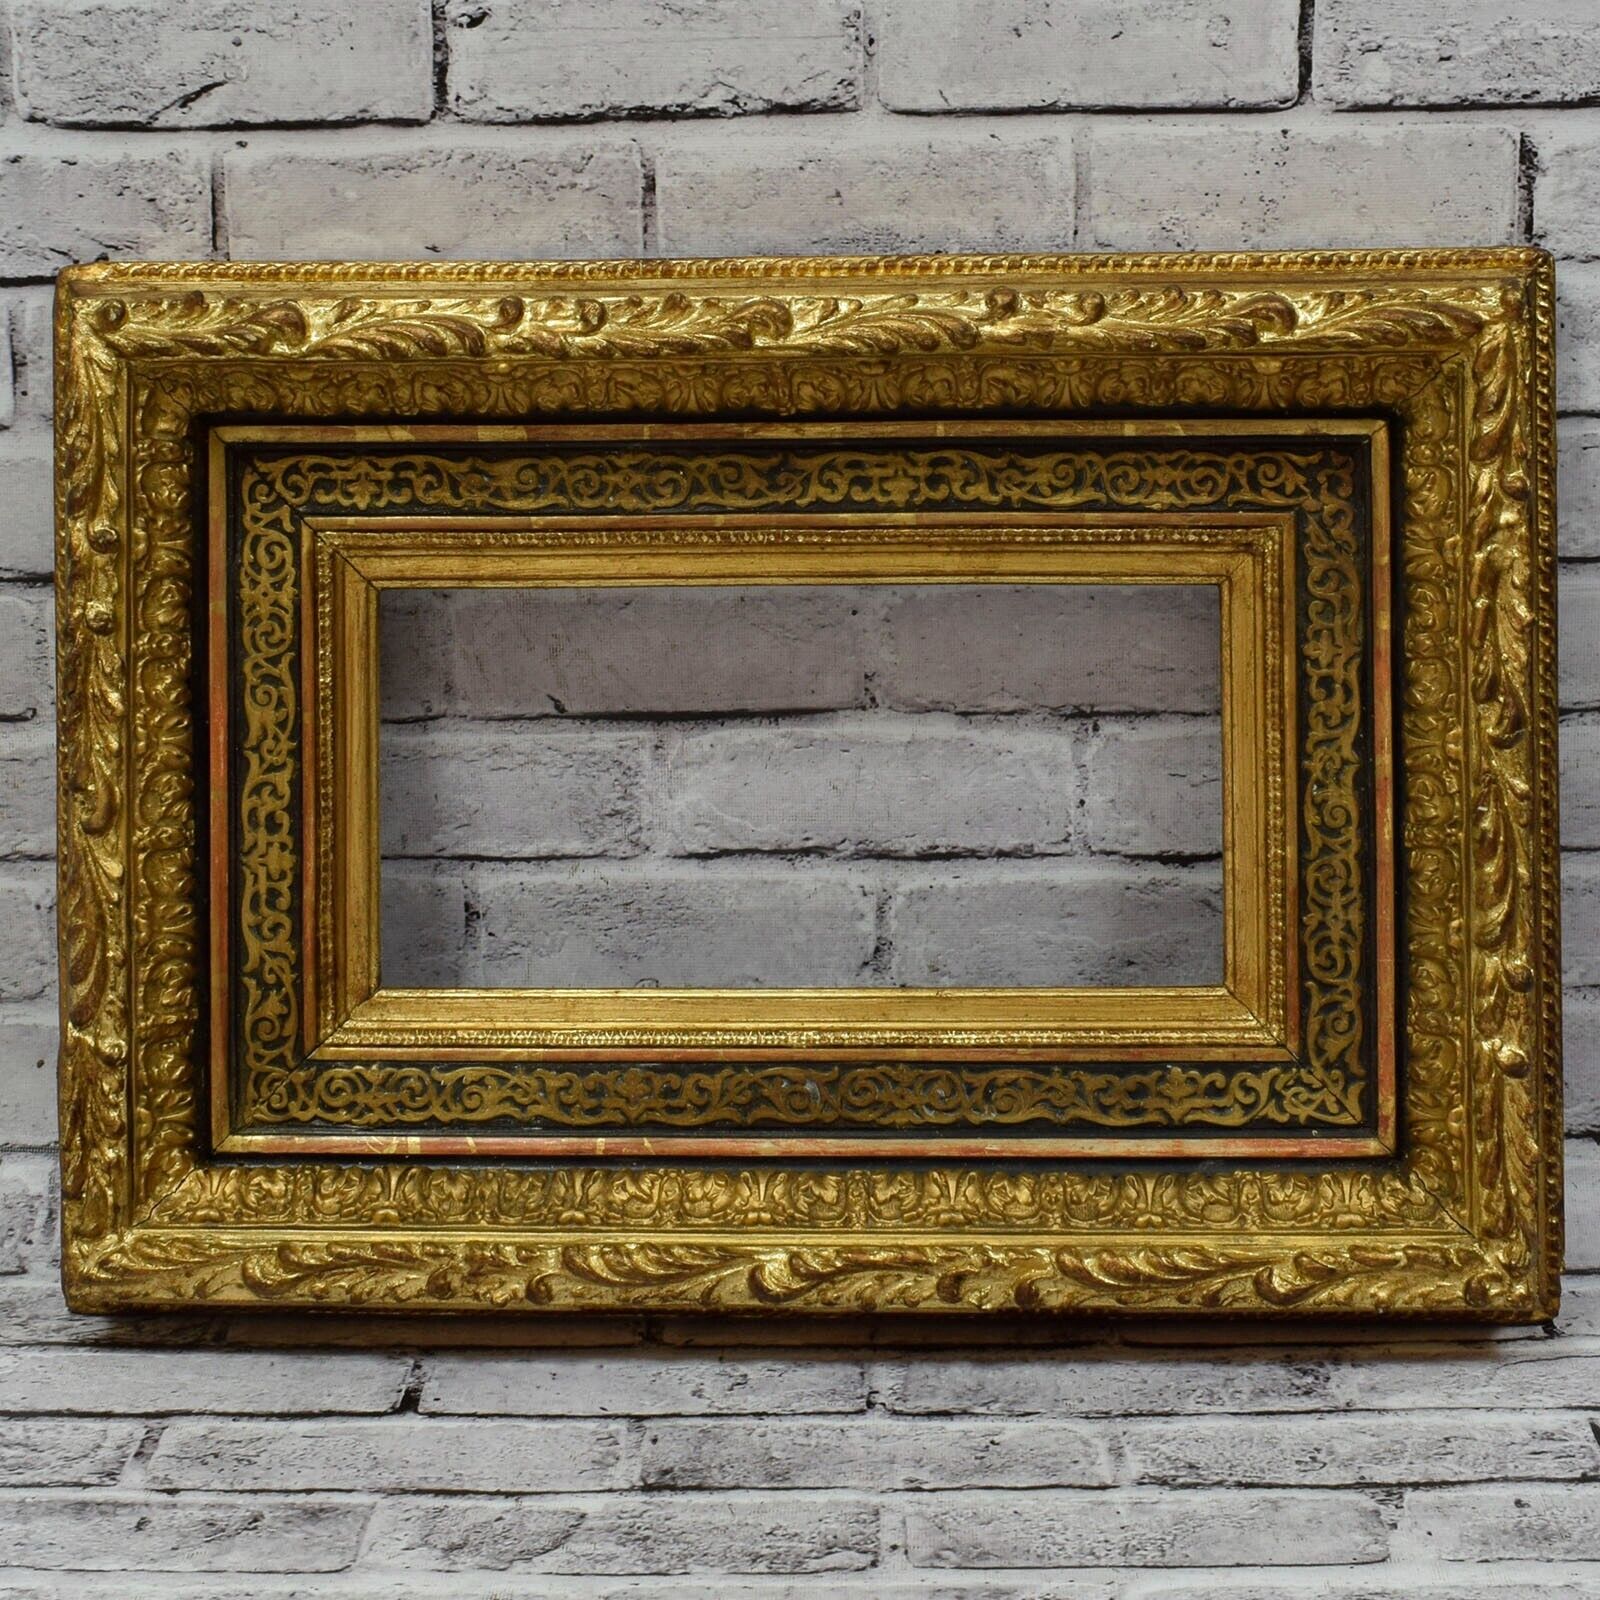 Ca. 1850 wooden frame partly original gliding dimensions 14.5 x 7.5 in inside